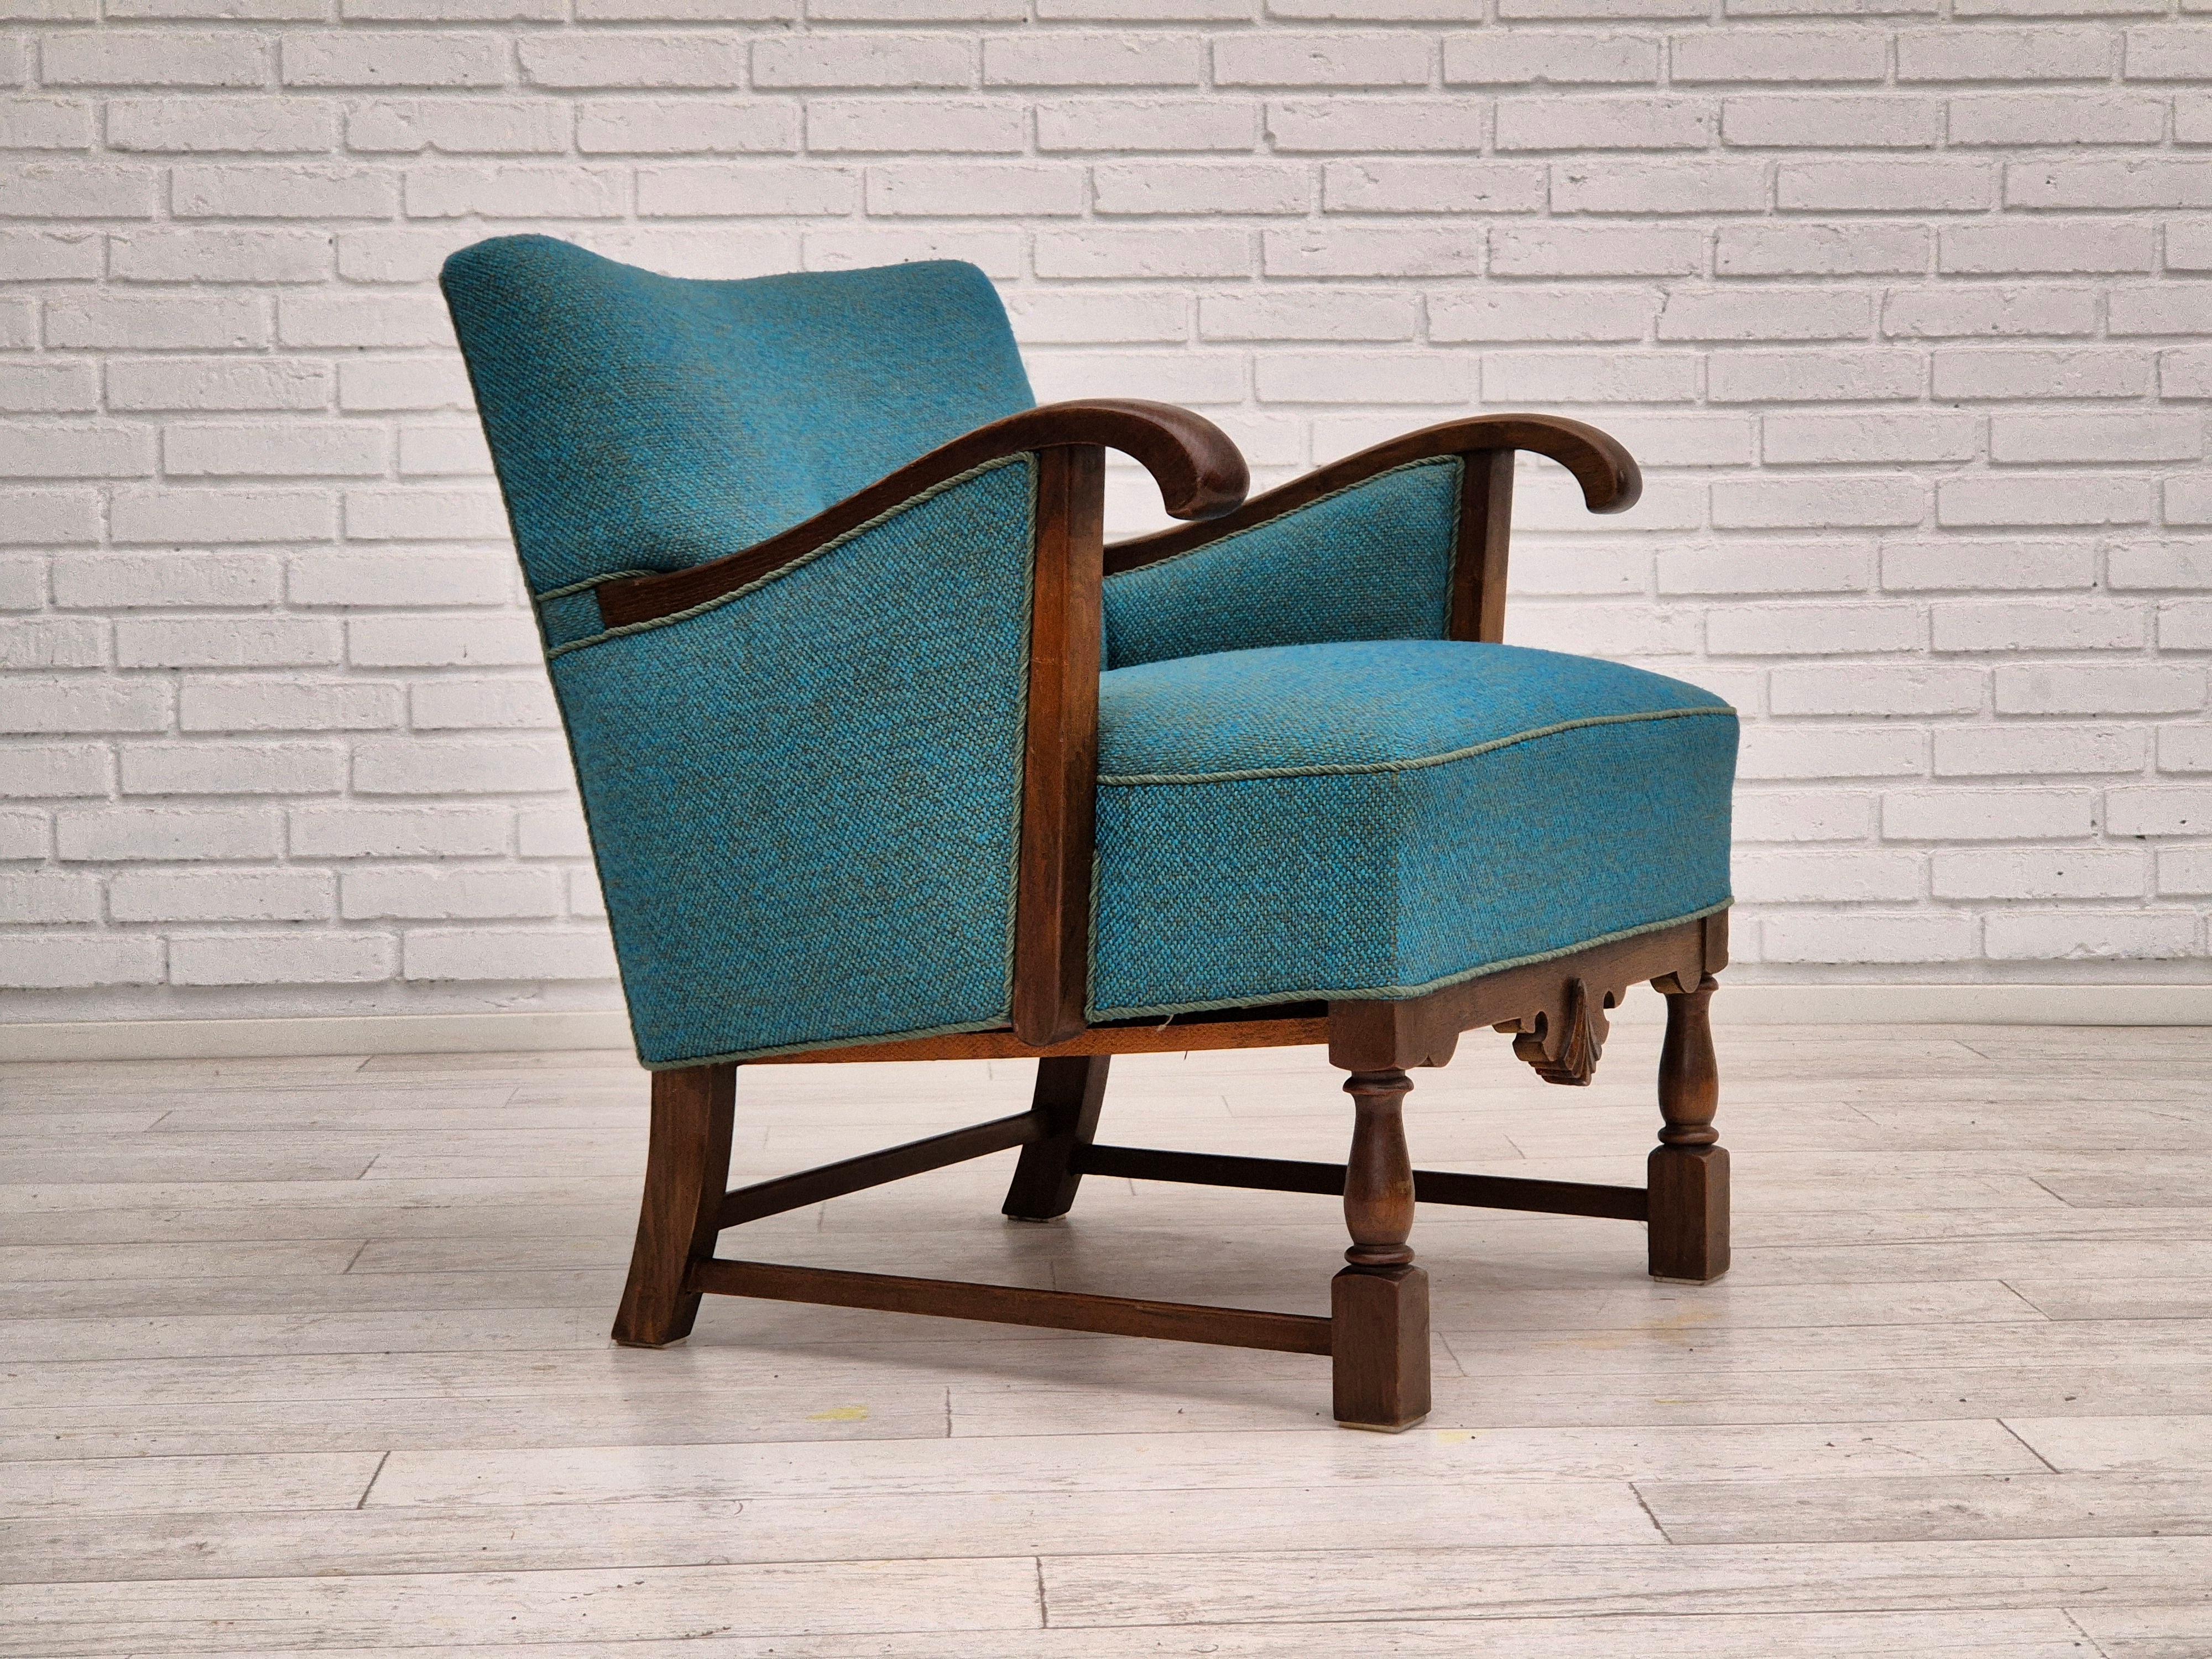 1960s, Danish lounge chair in very good condition: no smells and no stains. Chair was reupholstered about 20 years ago by craftsman. Furniture wool, oak wood, springs in the seat. Manufactured by Danish furniture manufacturer in about 1955-60s.